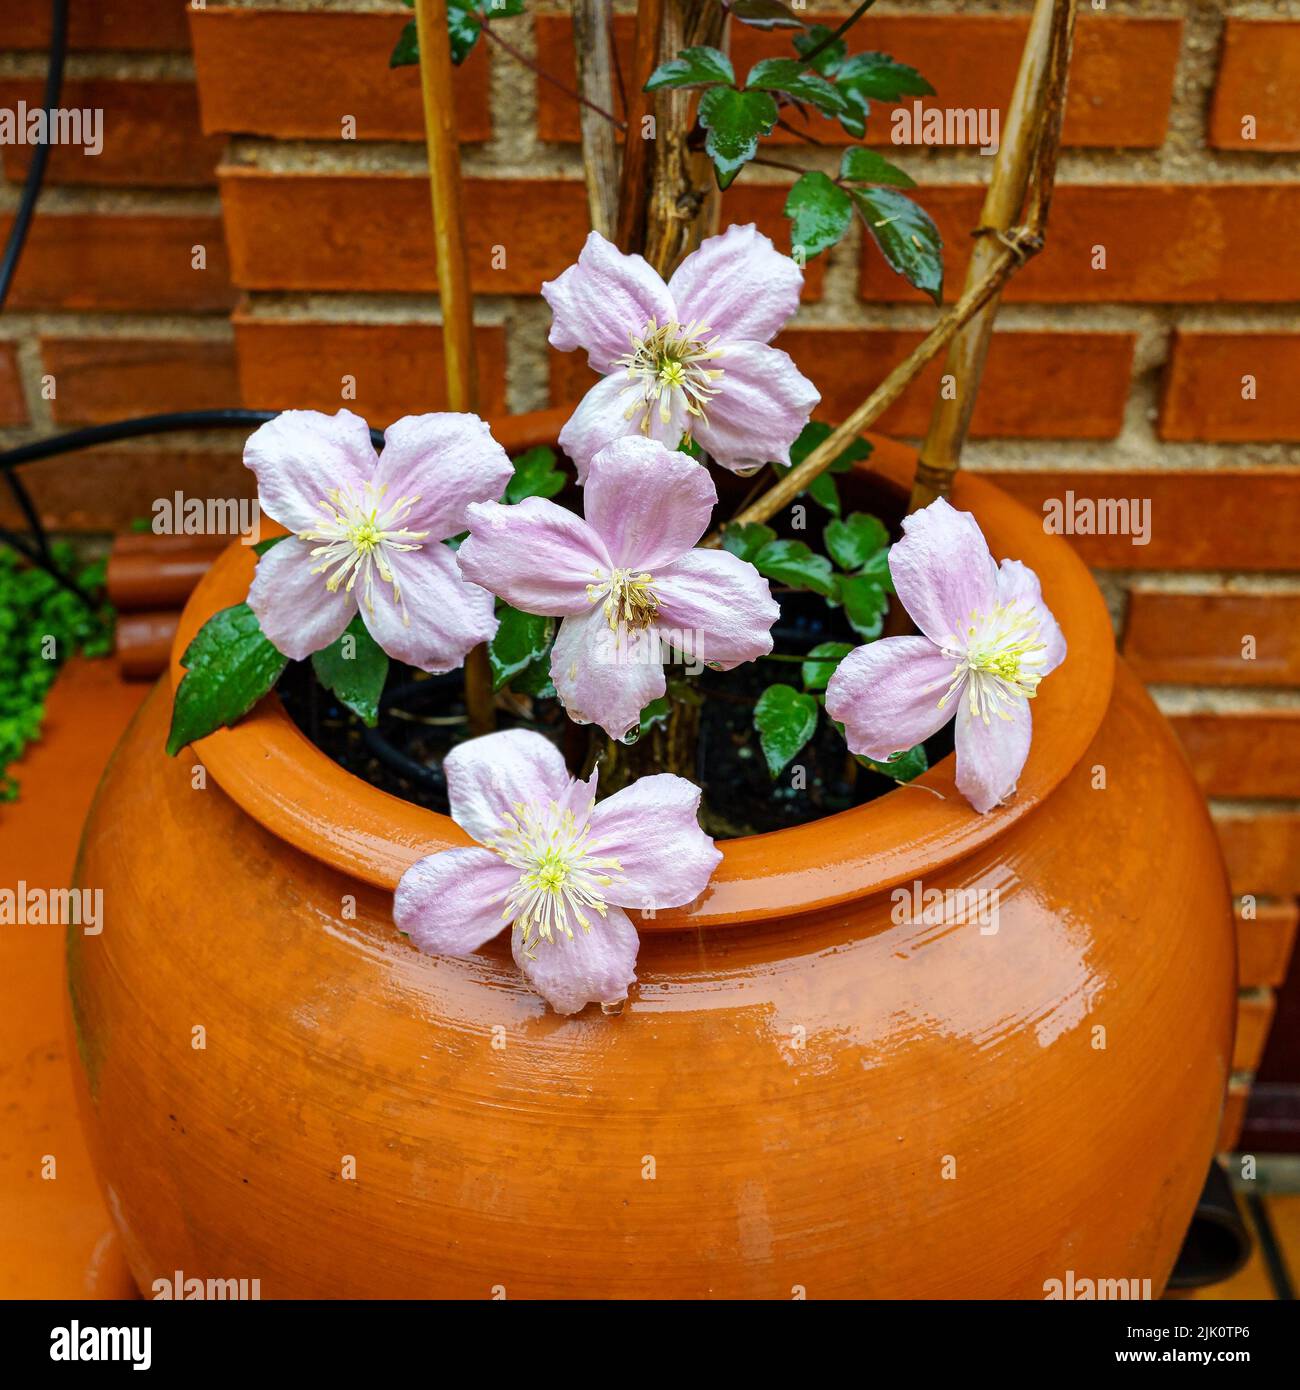 Pink flowers in a circular pot on a rainy spring day. Madrid. Stock Photo